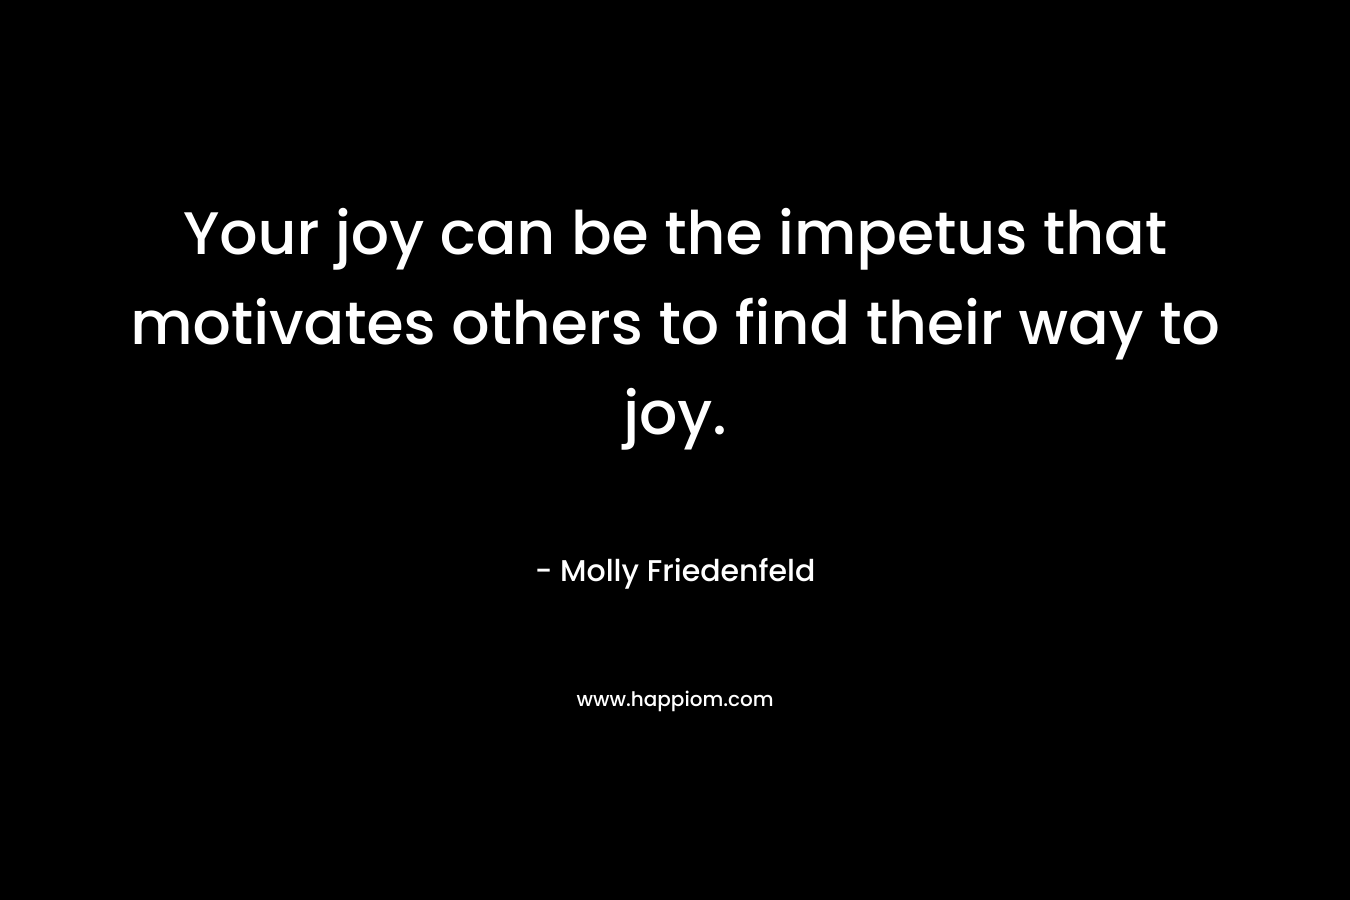 Your joy can be the impetus that motivates others to find their way to joy. – Molly Friedenfeld